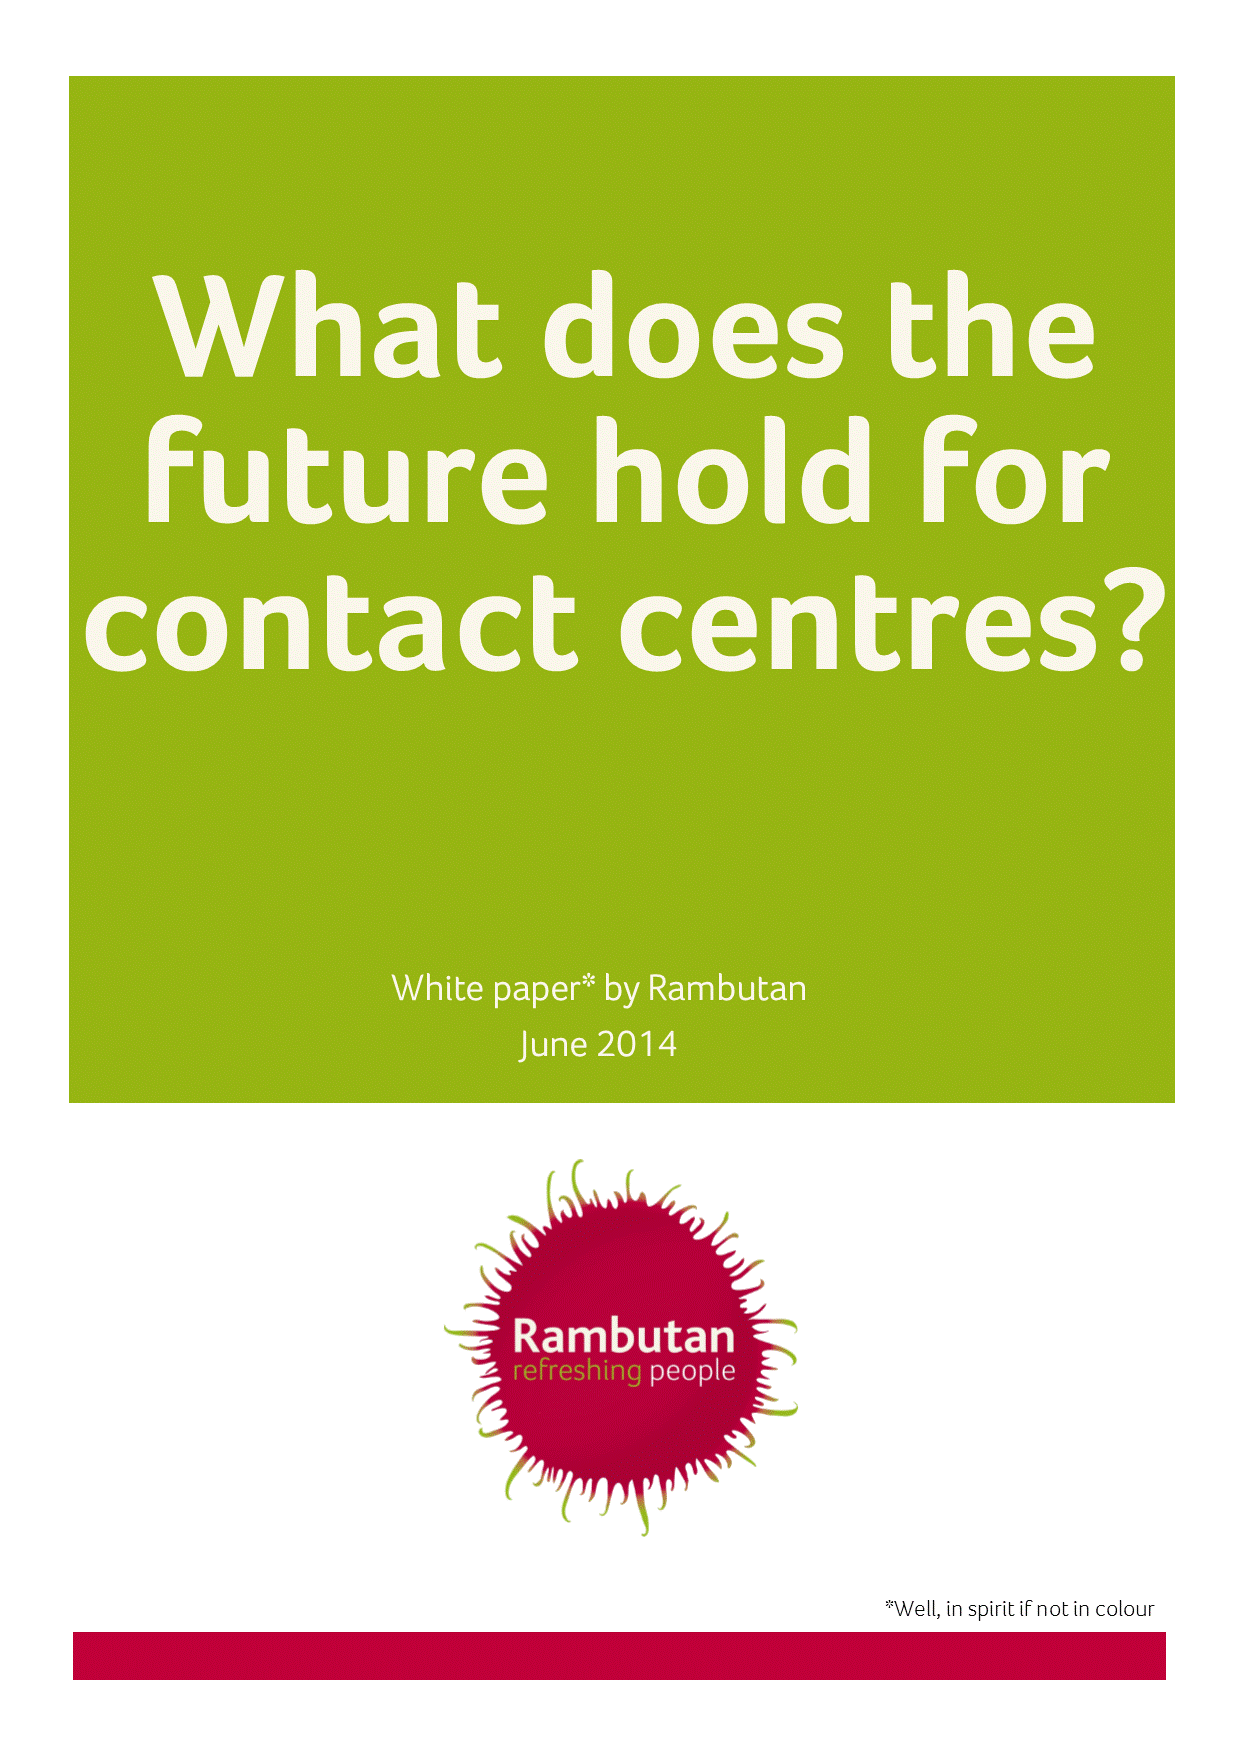 Download our free whitepaper to find out more